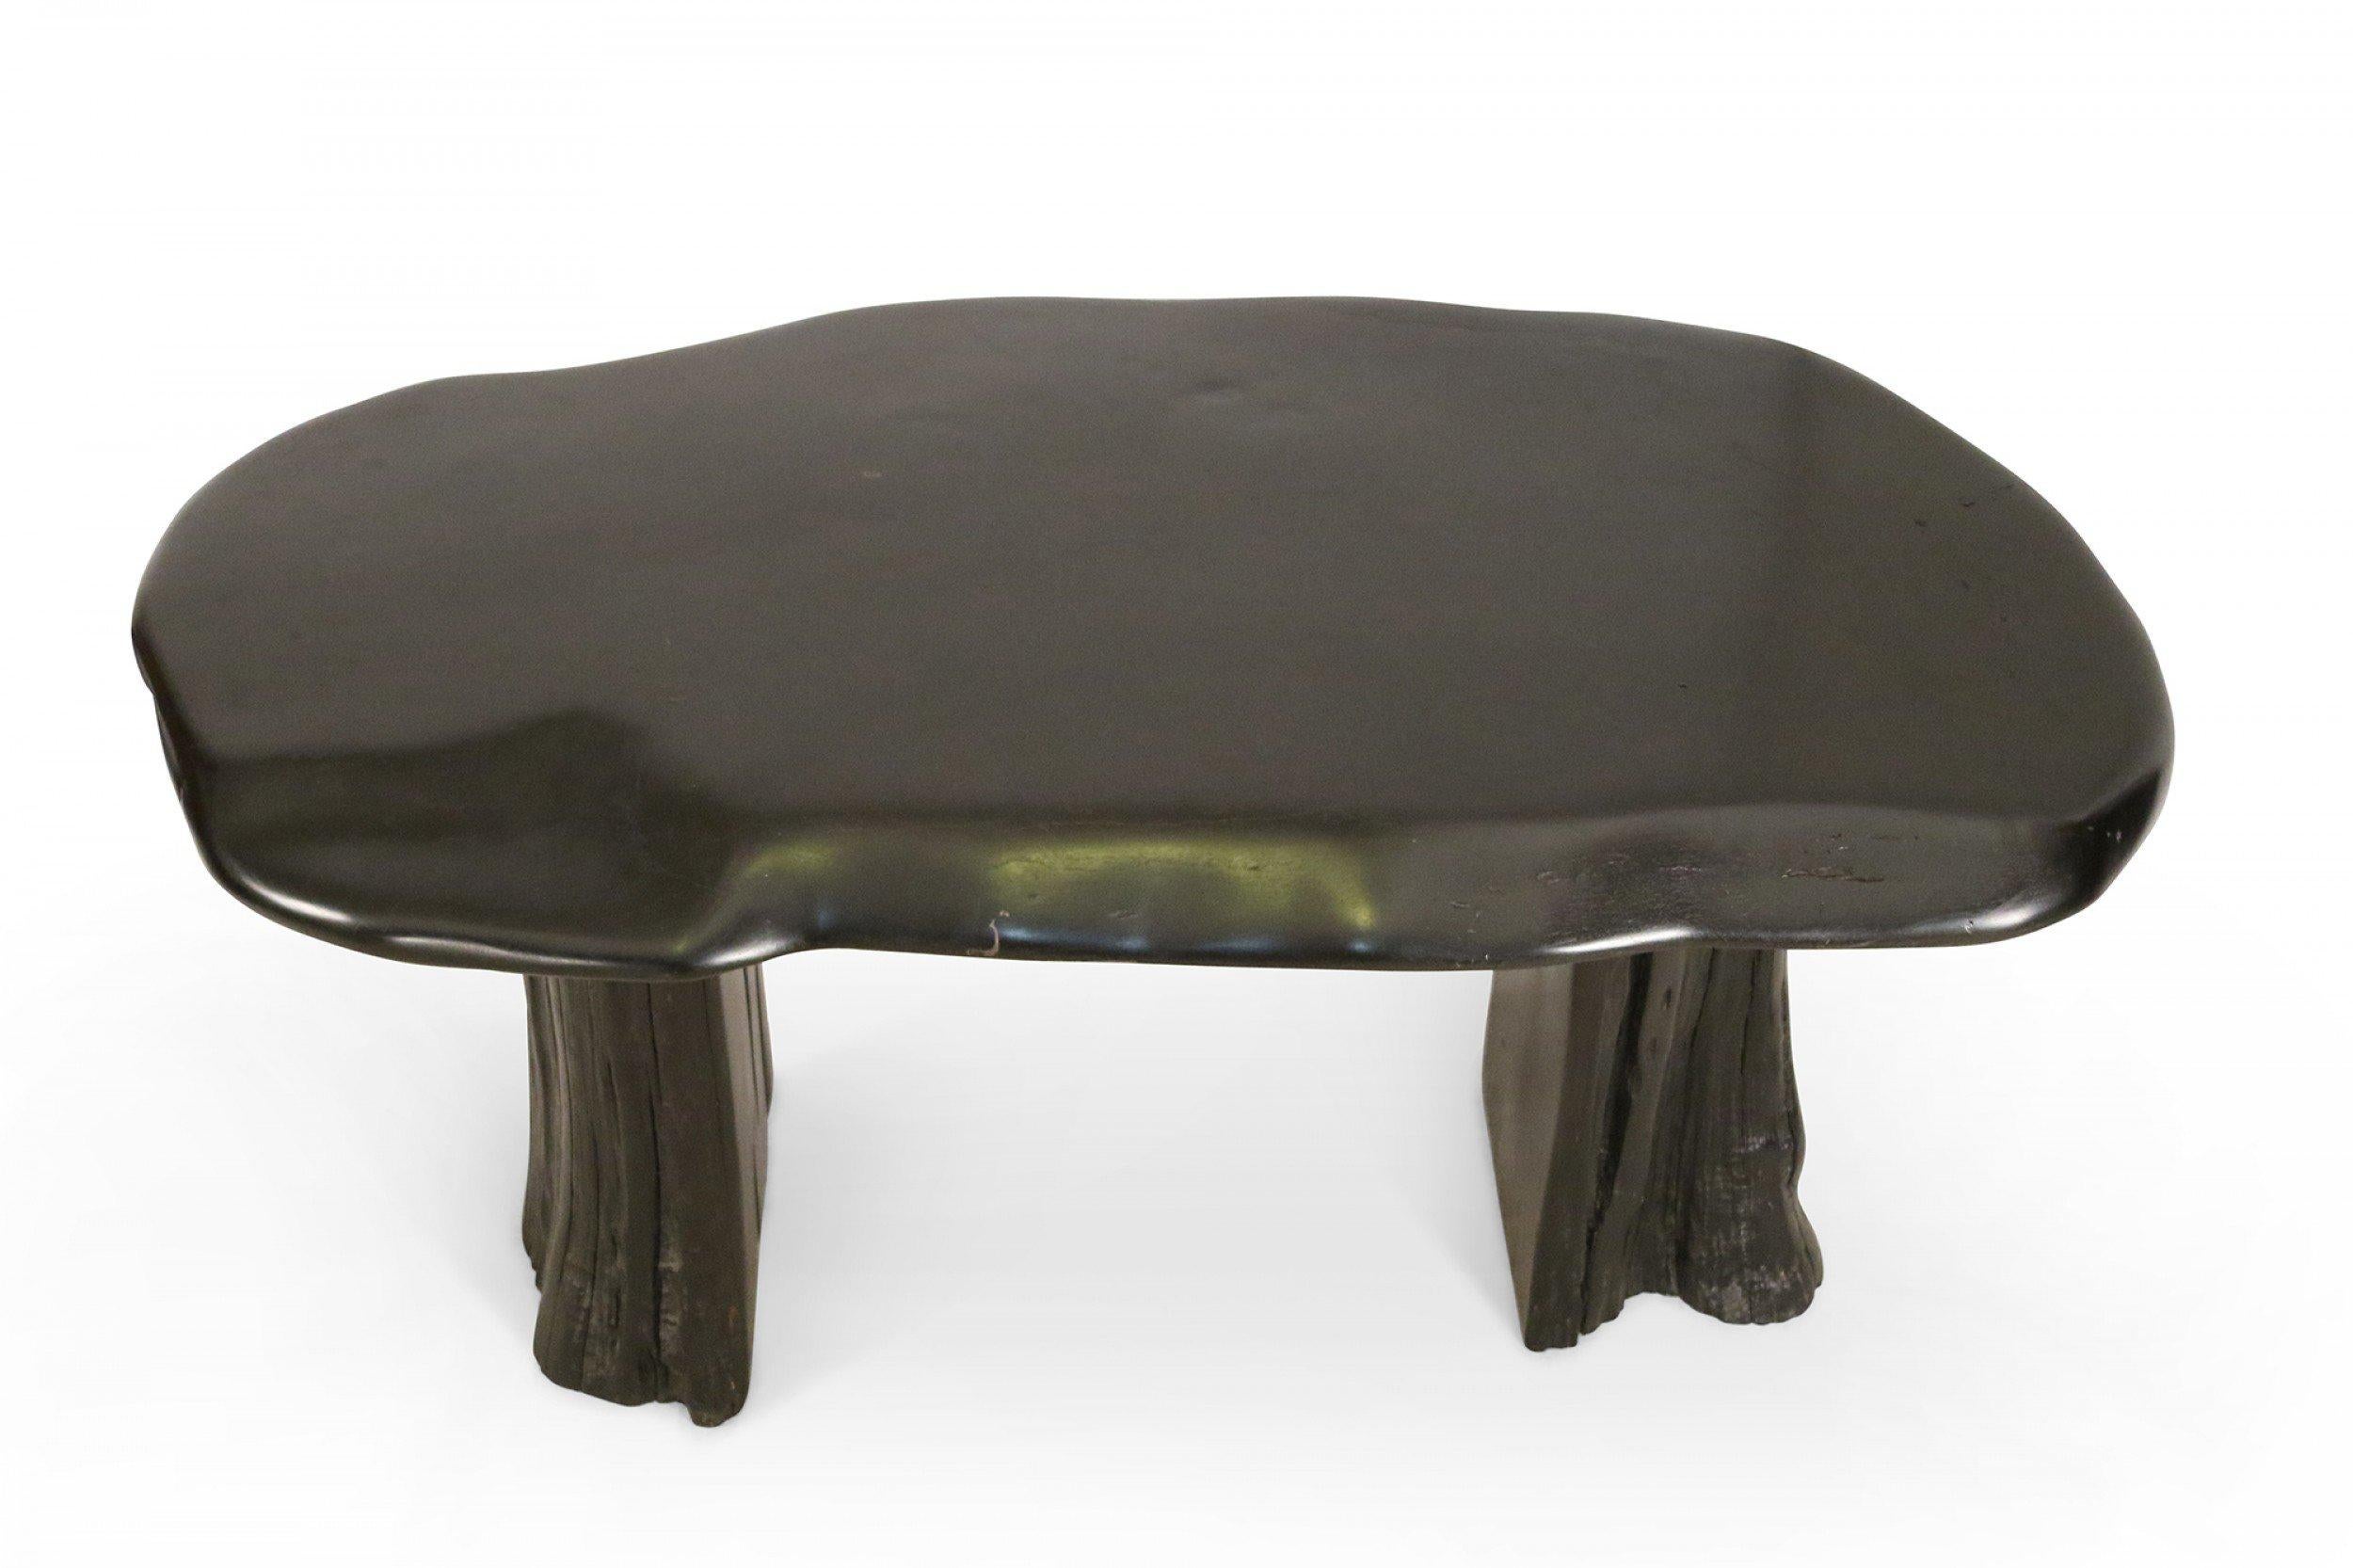 Modern Contemporary Black Painted Tree Trunk Design Desk or Console Table For Sale